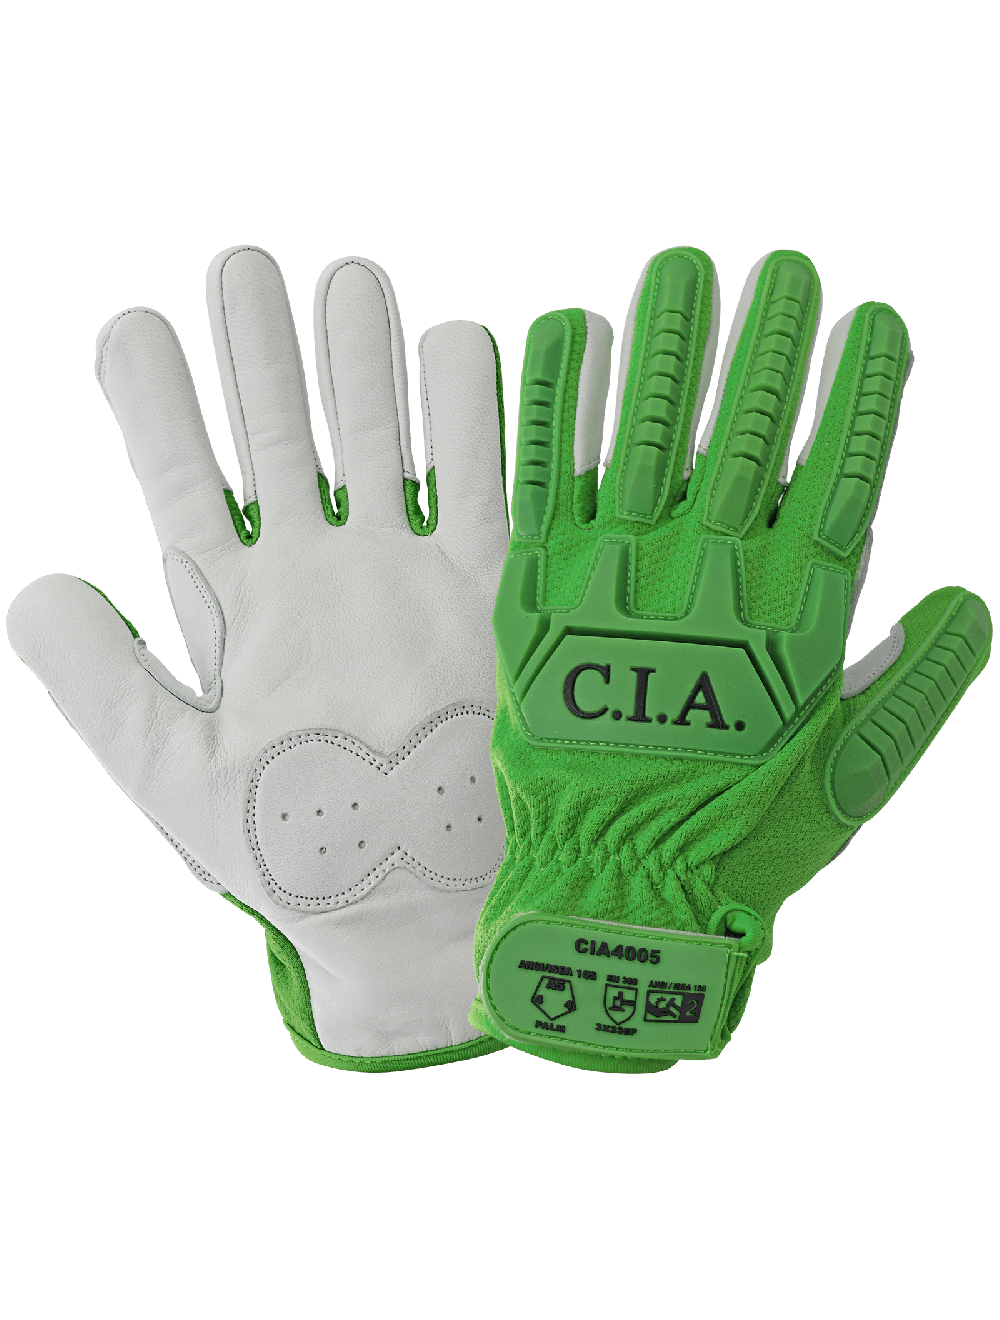 Cut and Impact Resistant Mechanics Style Gloves with a Premium Leather Palm - CIA4005 Sold by Dozen